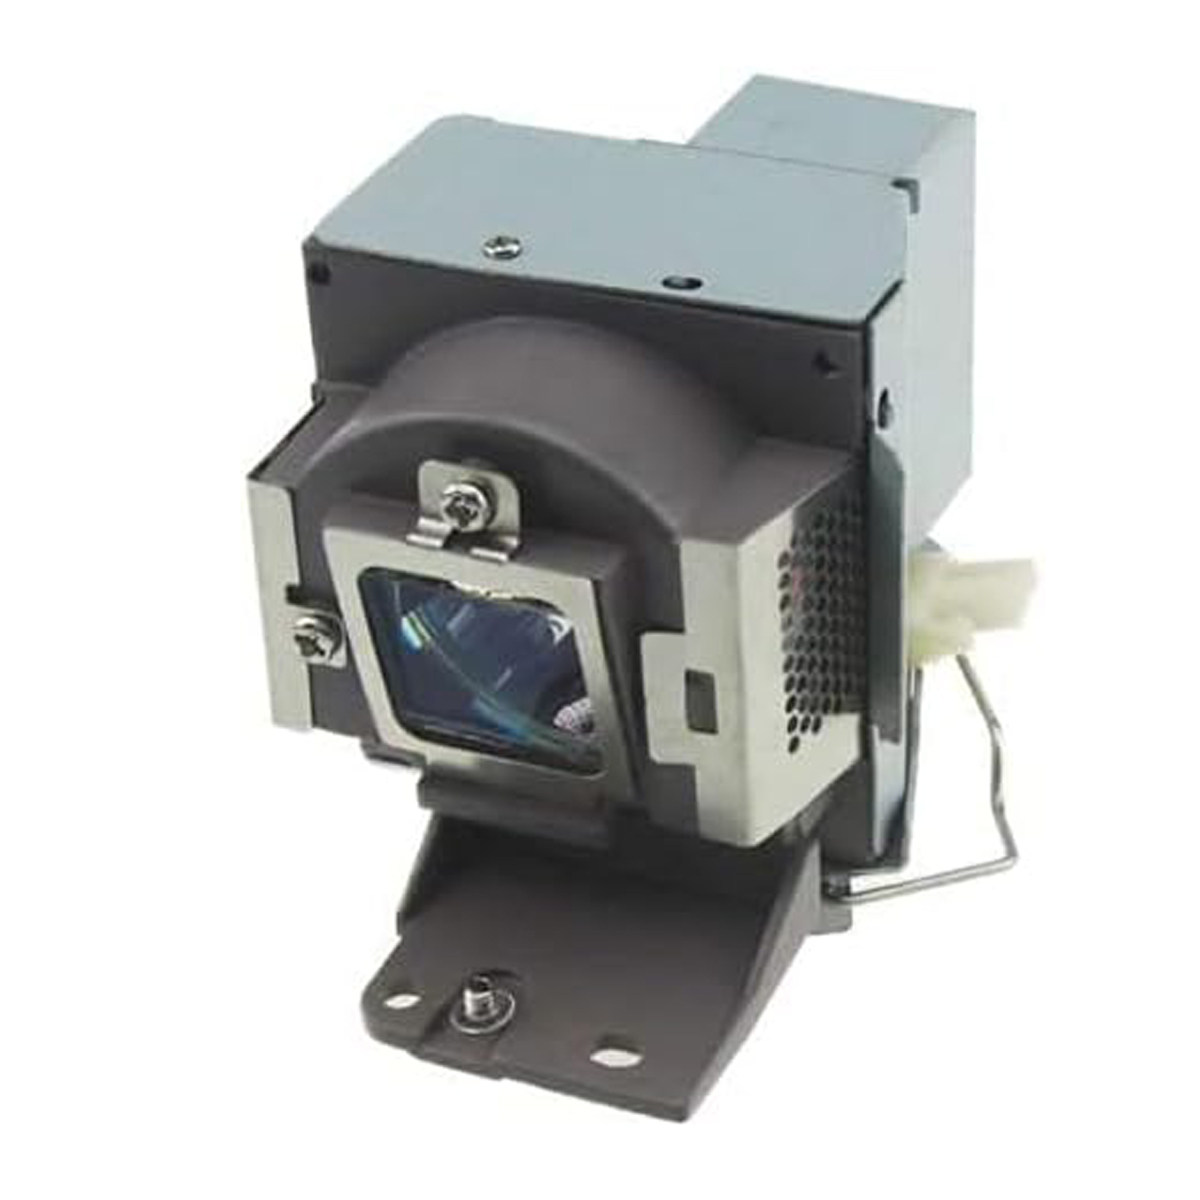 Replacement Projector lamp 5J.J5205.001 For MS500/ MS500+ /MS500-v